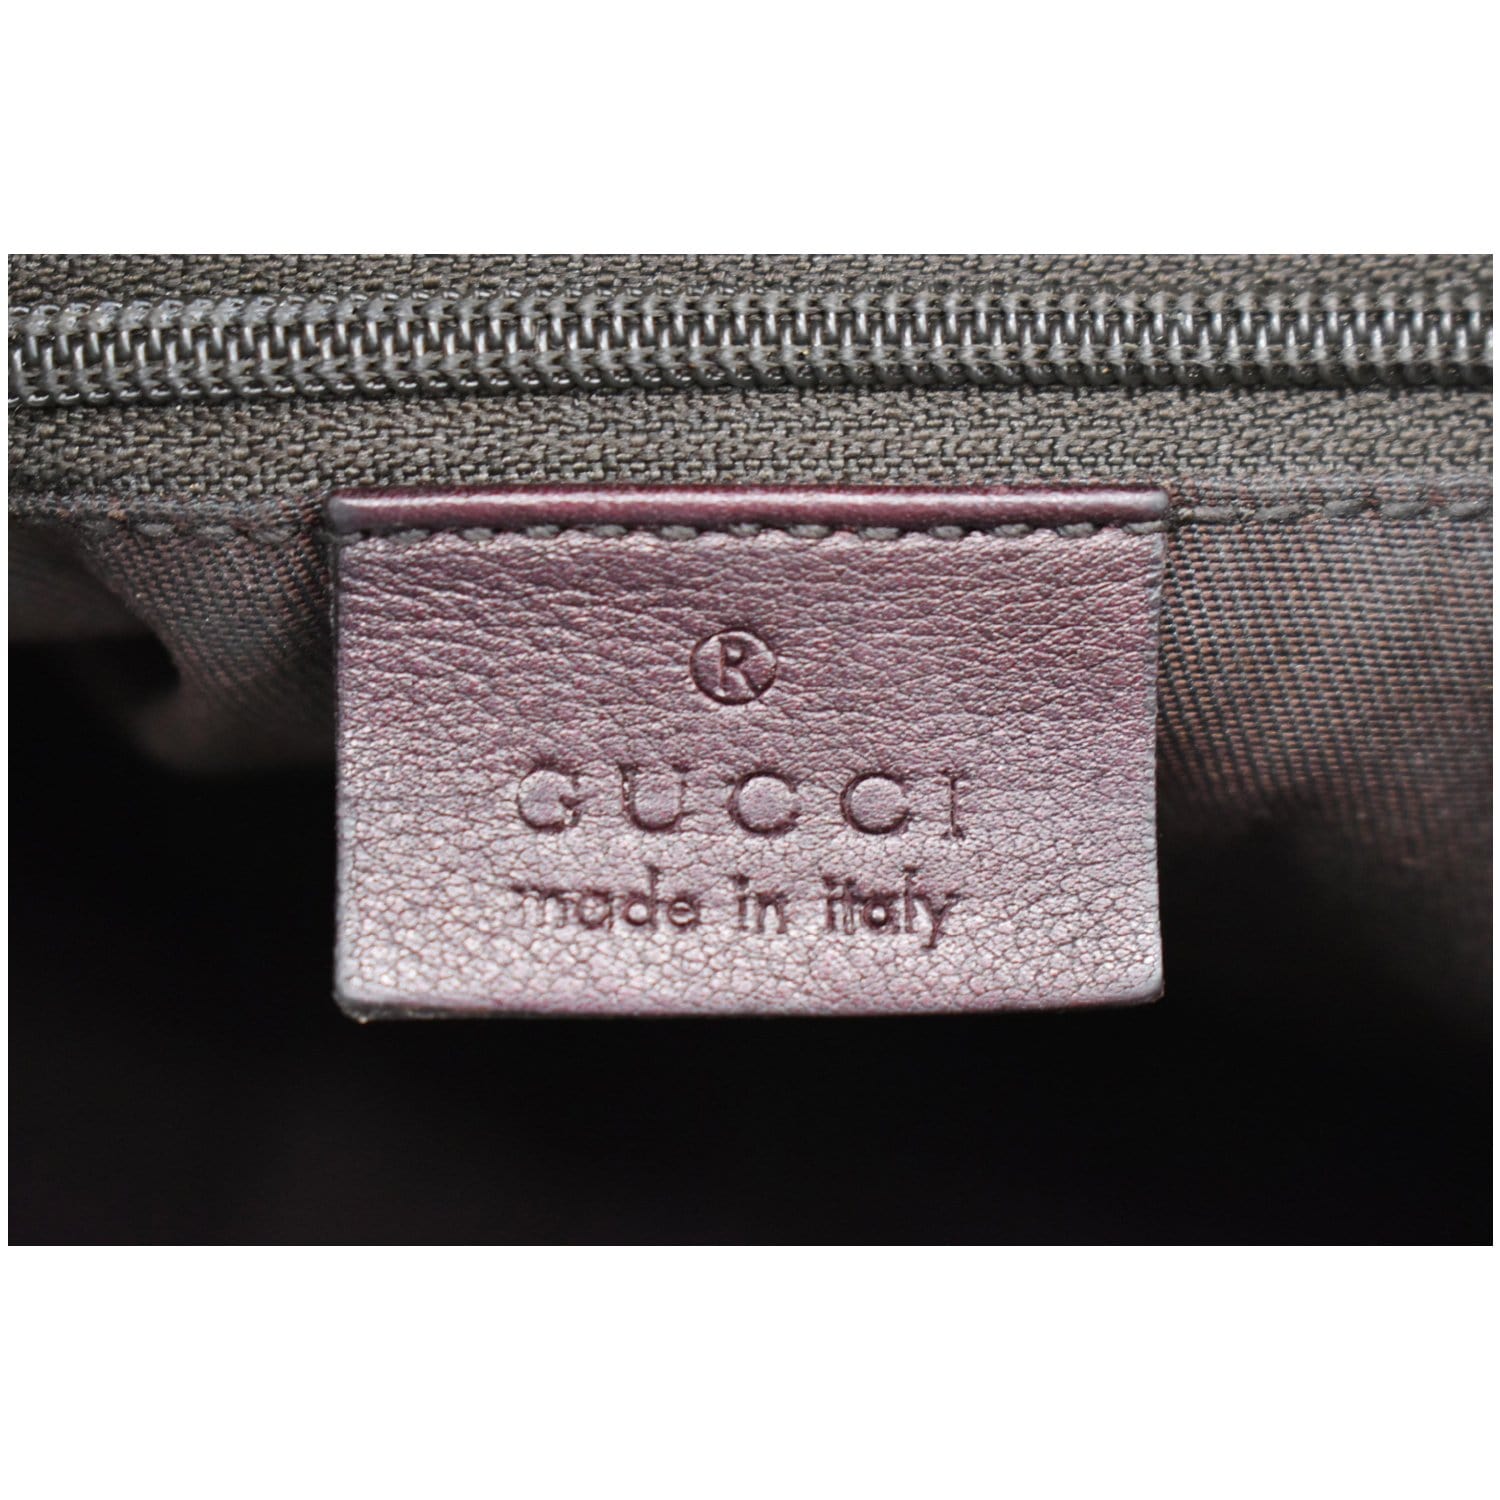 How To Tell Your Gucci Product Is Real - Authentic Gucci 